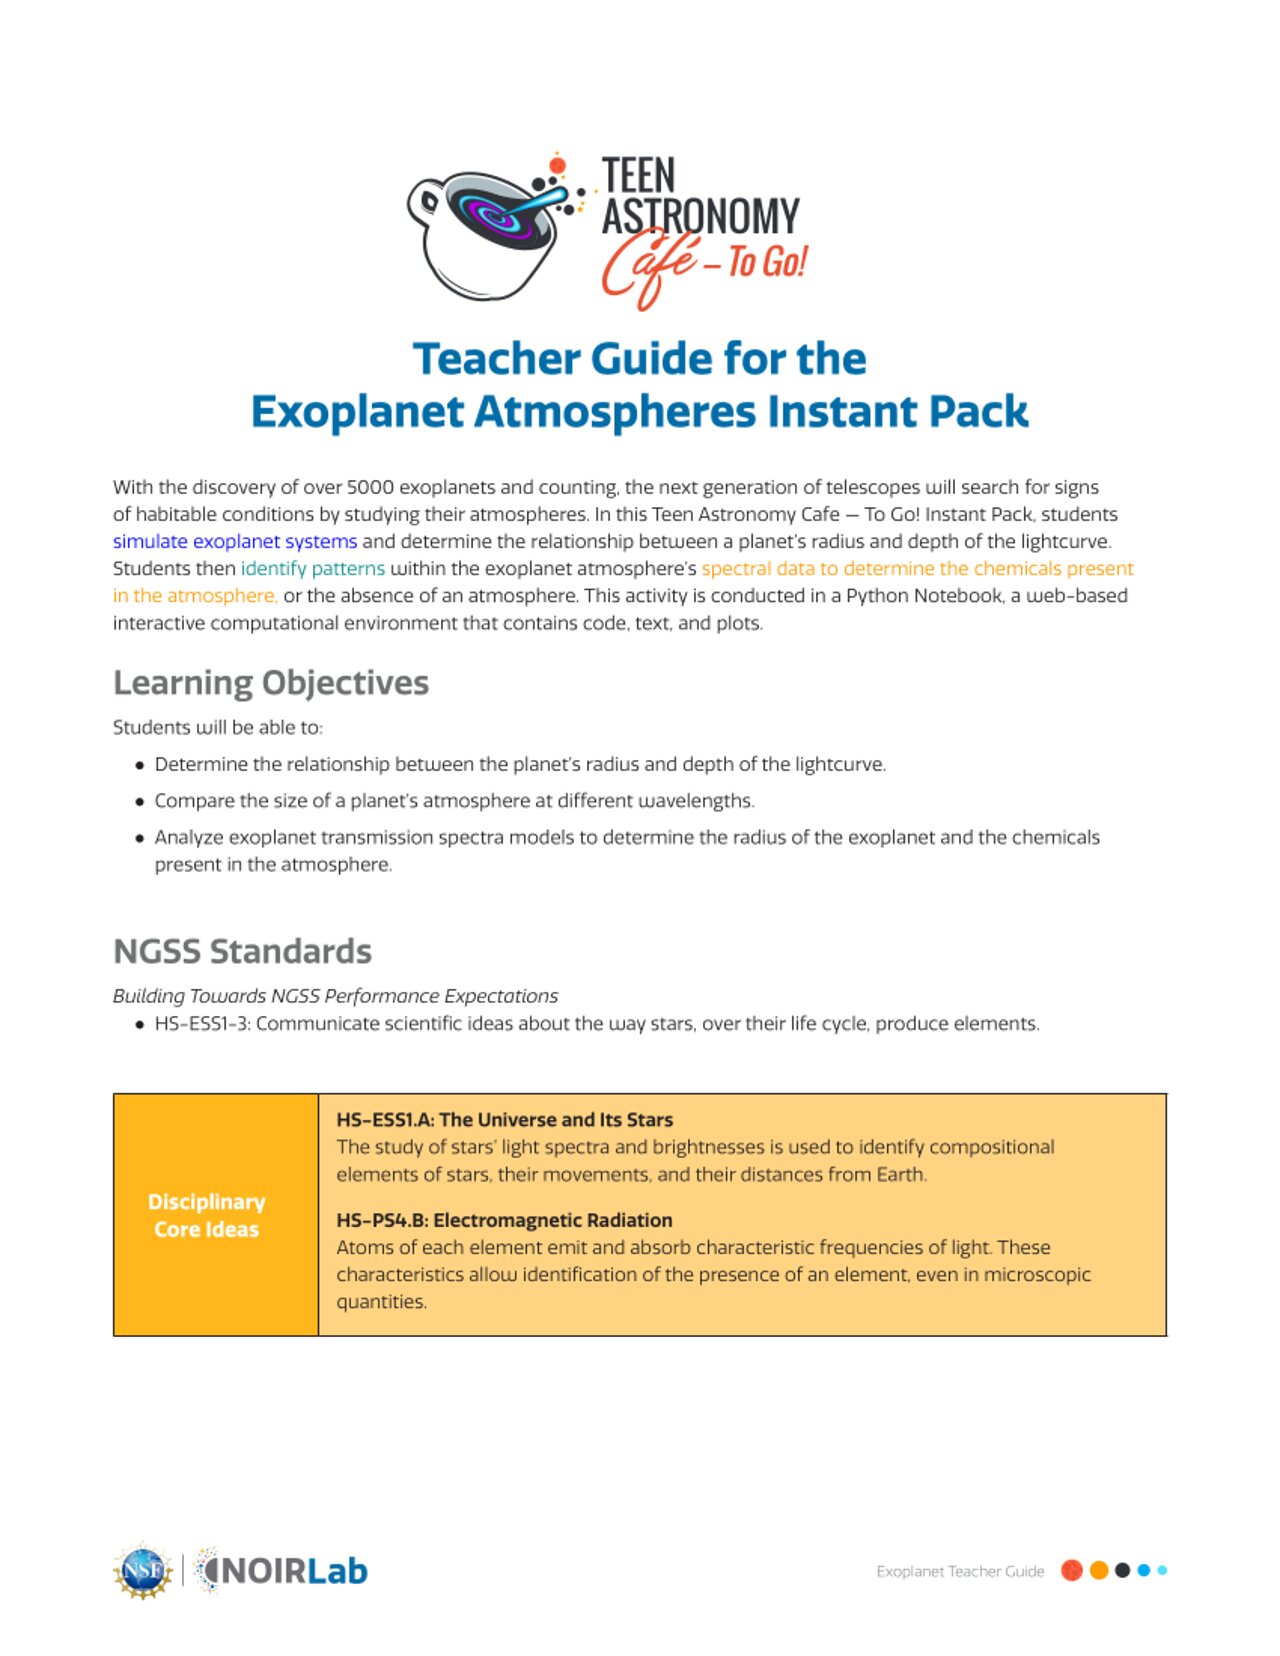 Educational Material: Teacher Guide for the Exoplanet Atmospheres Instant Pack